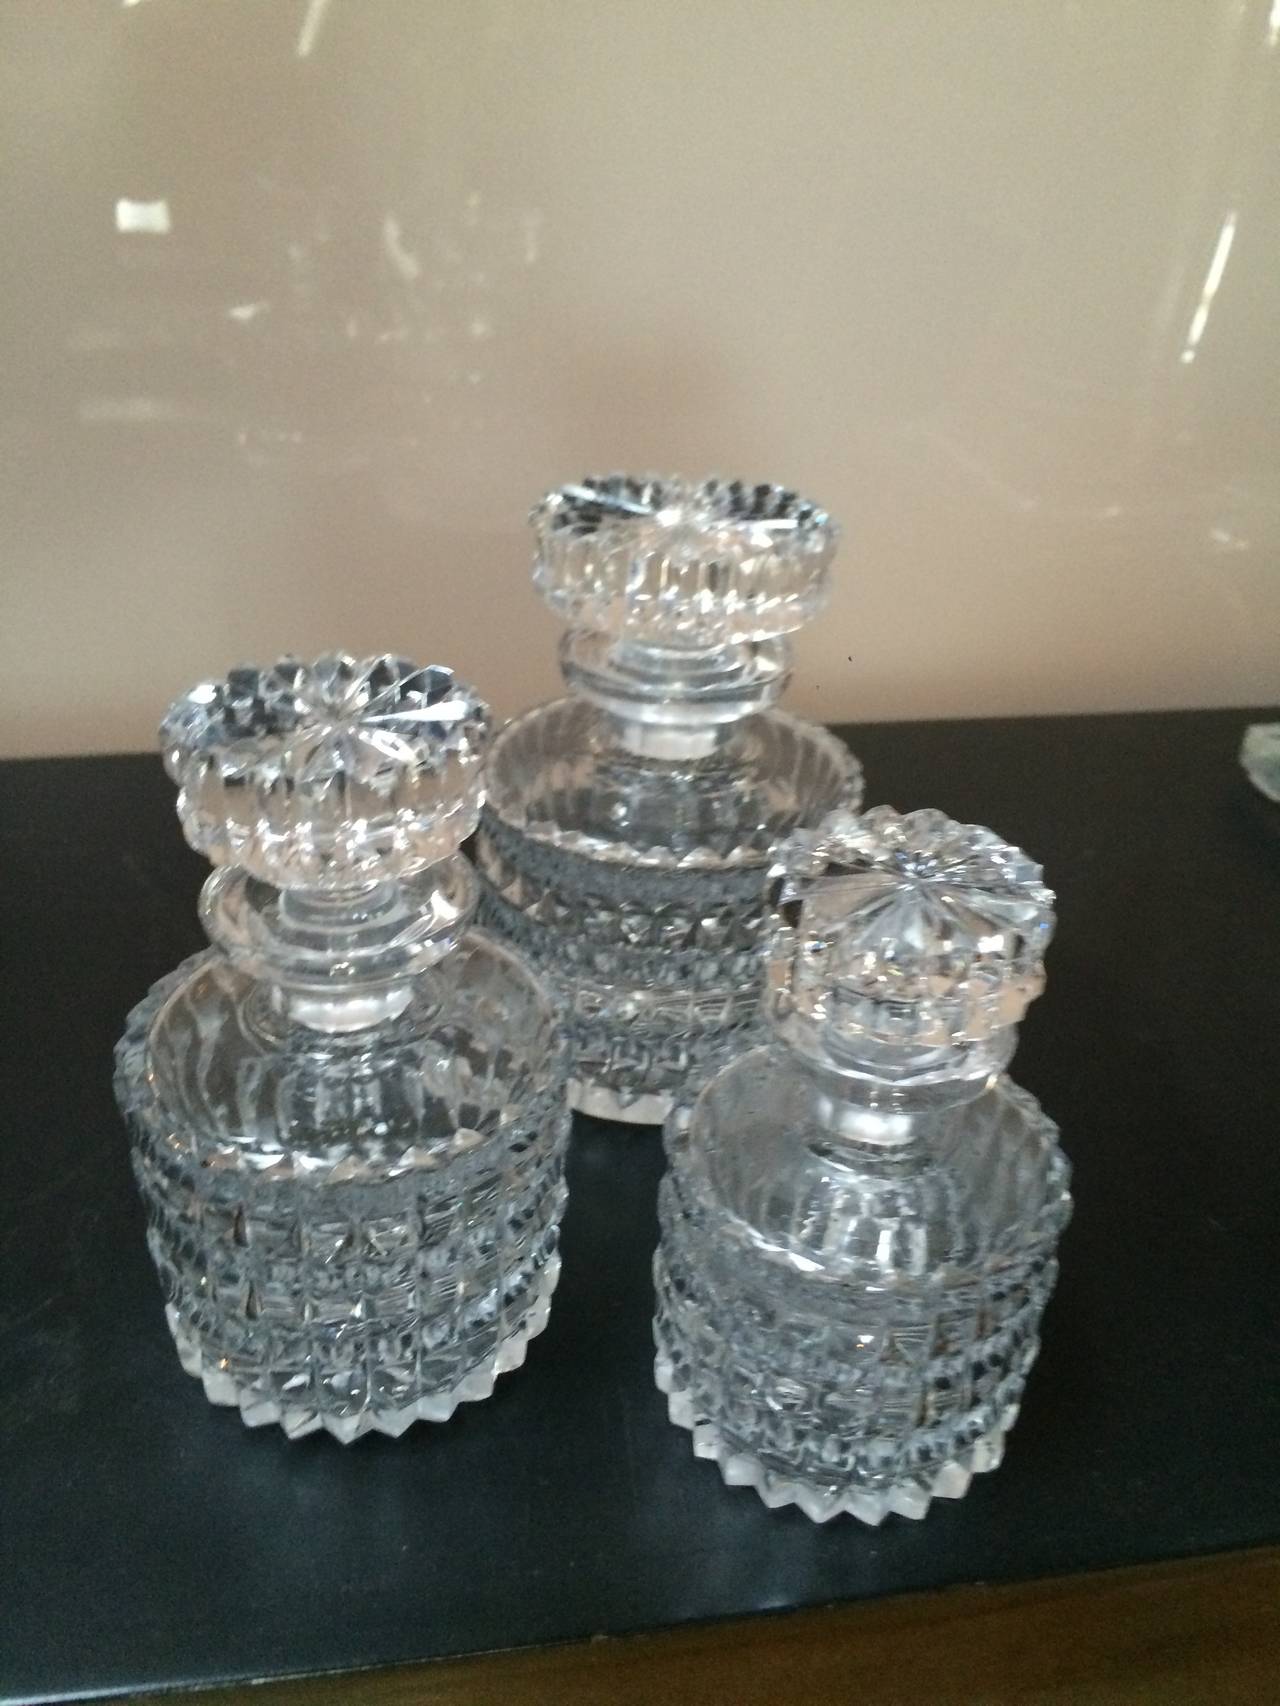 Beautiful and petite decanters perfect for perfumes, waters, special potions.
 
Measures: Smallest is 4